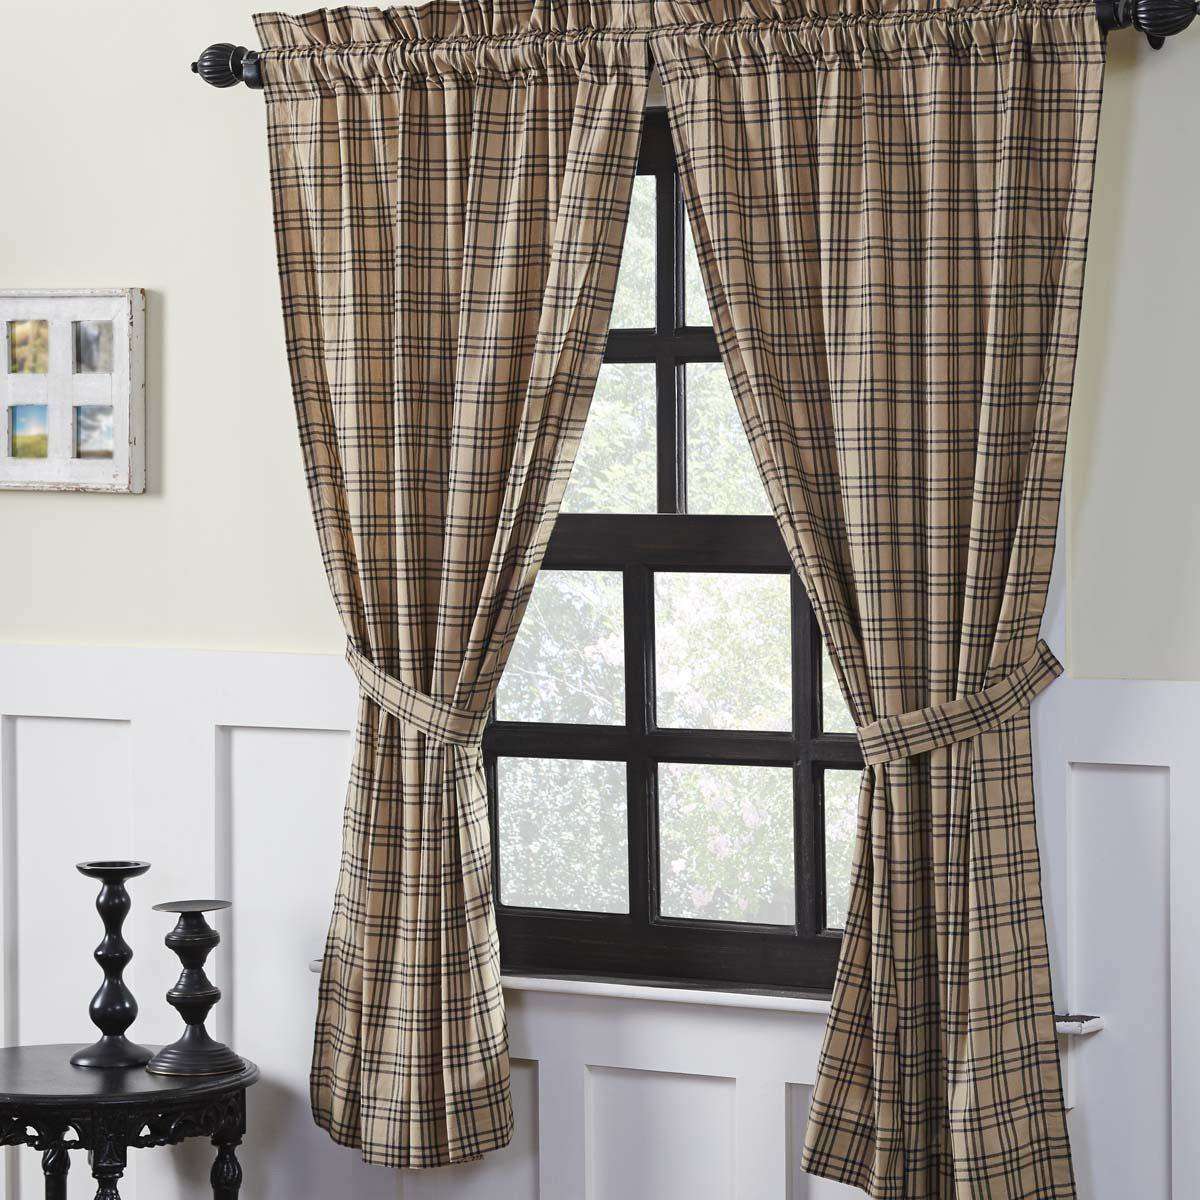 Sawyer Mill Charcoal Plaid Short Panel Country Curtain Set of 2 63"x36" - The Fox Decor